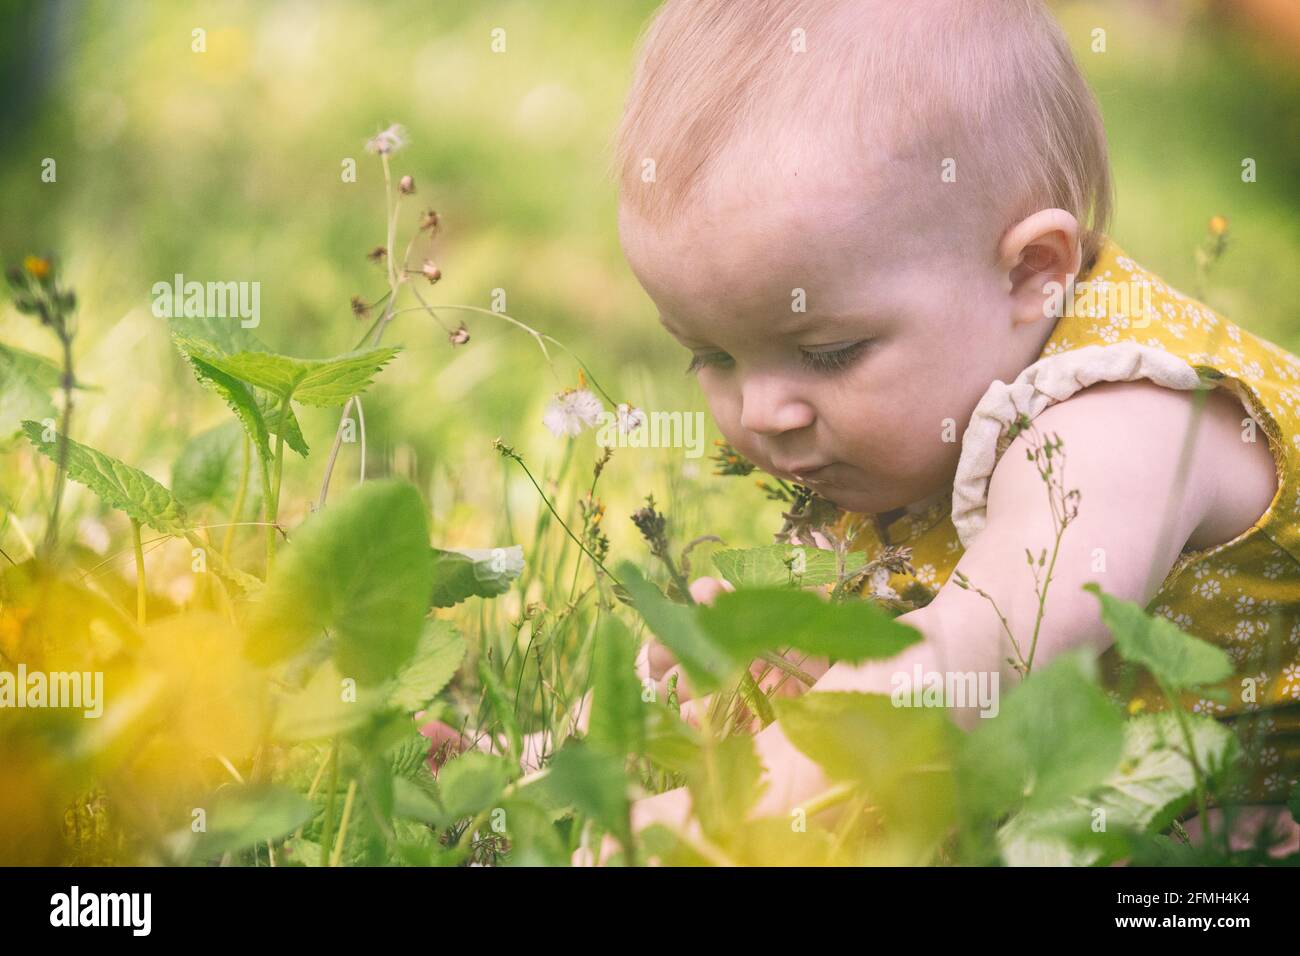 A baby girl plays among wildflowers in a garden. Stock Photo